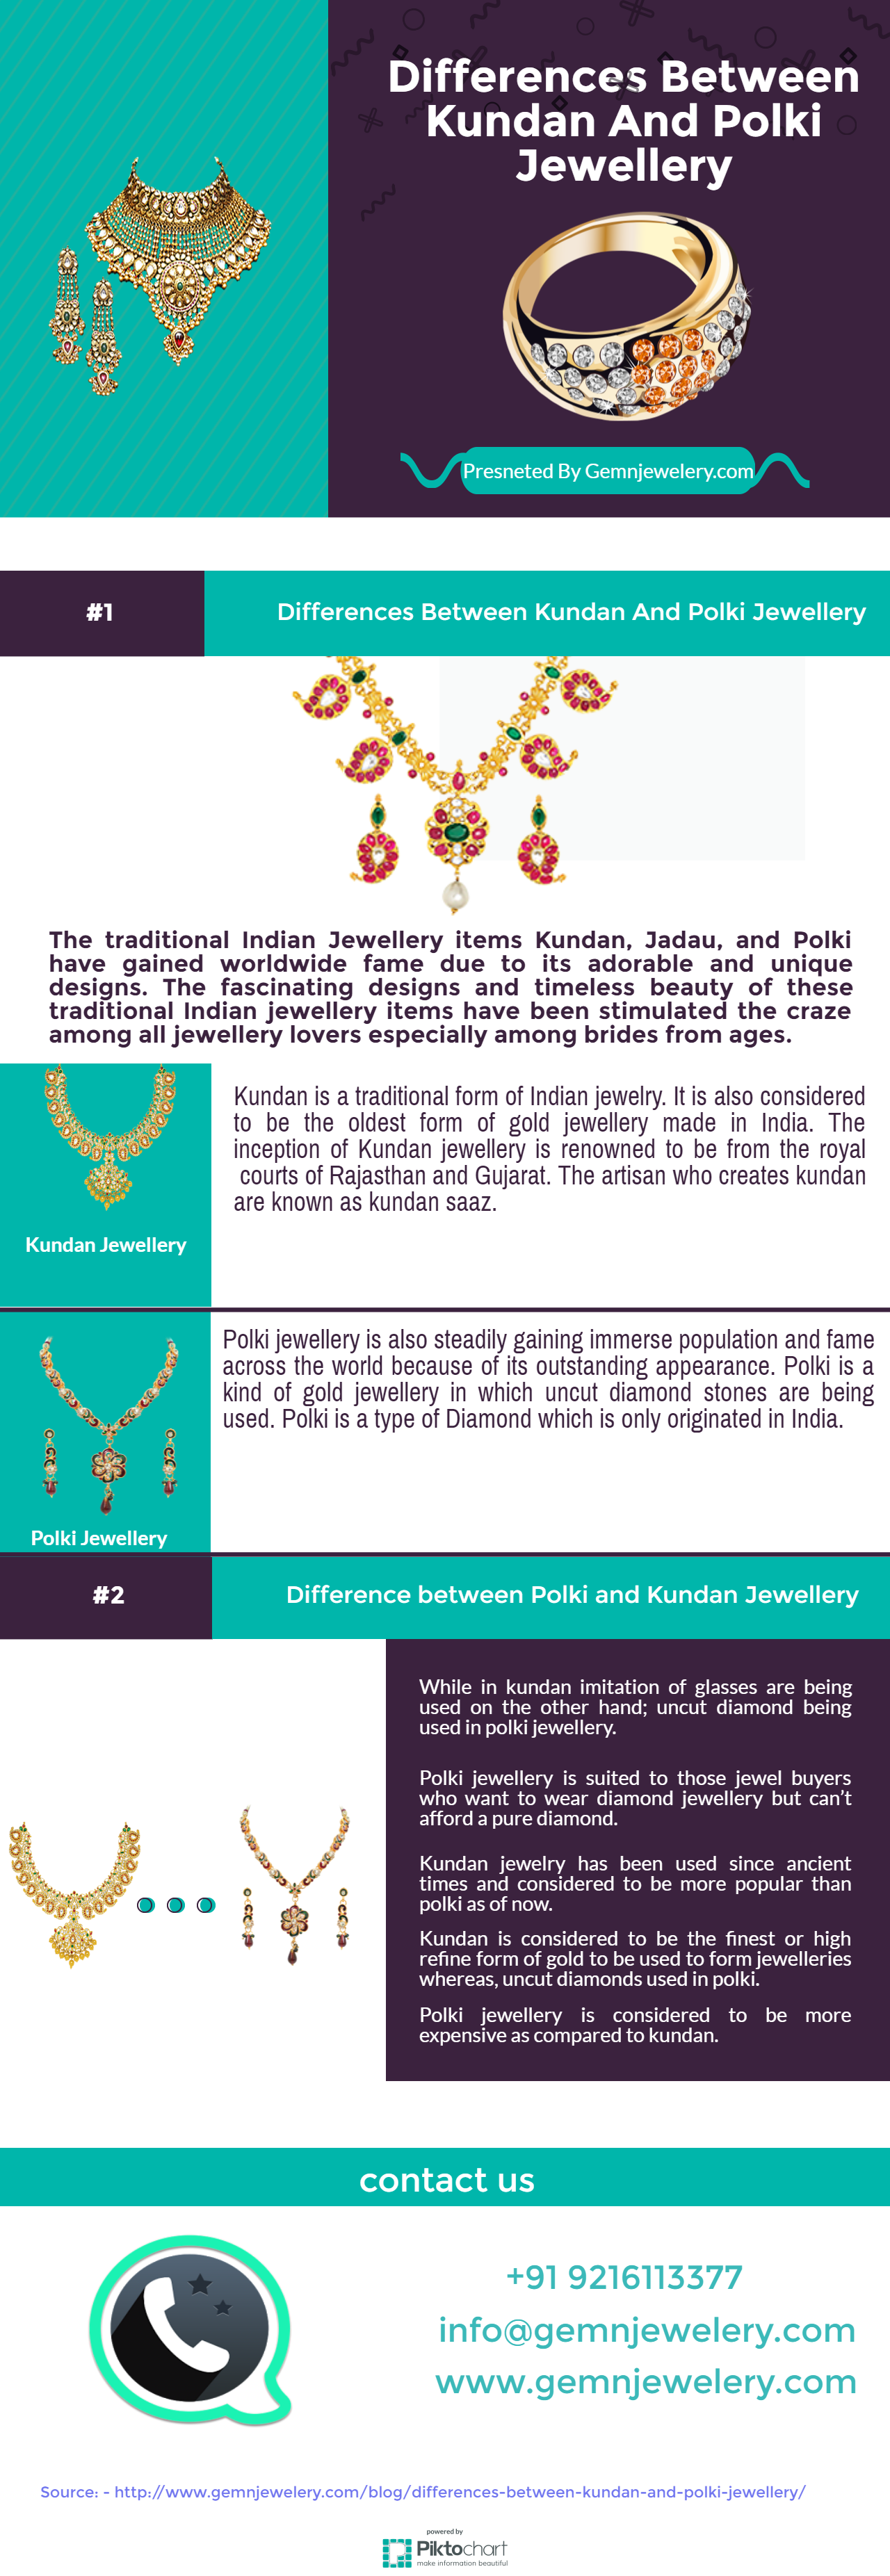 Differences Between Kundan And Polki Jewellery | Visual.ly